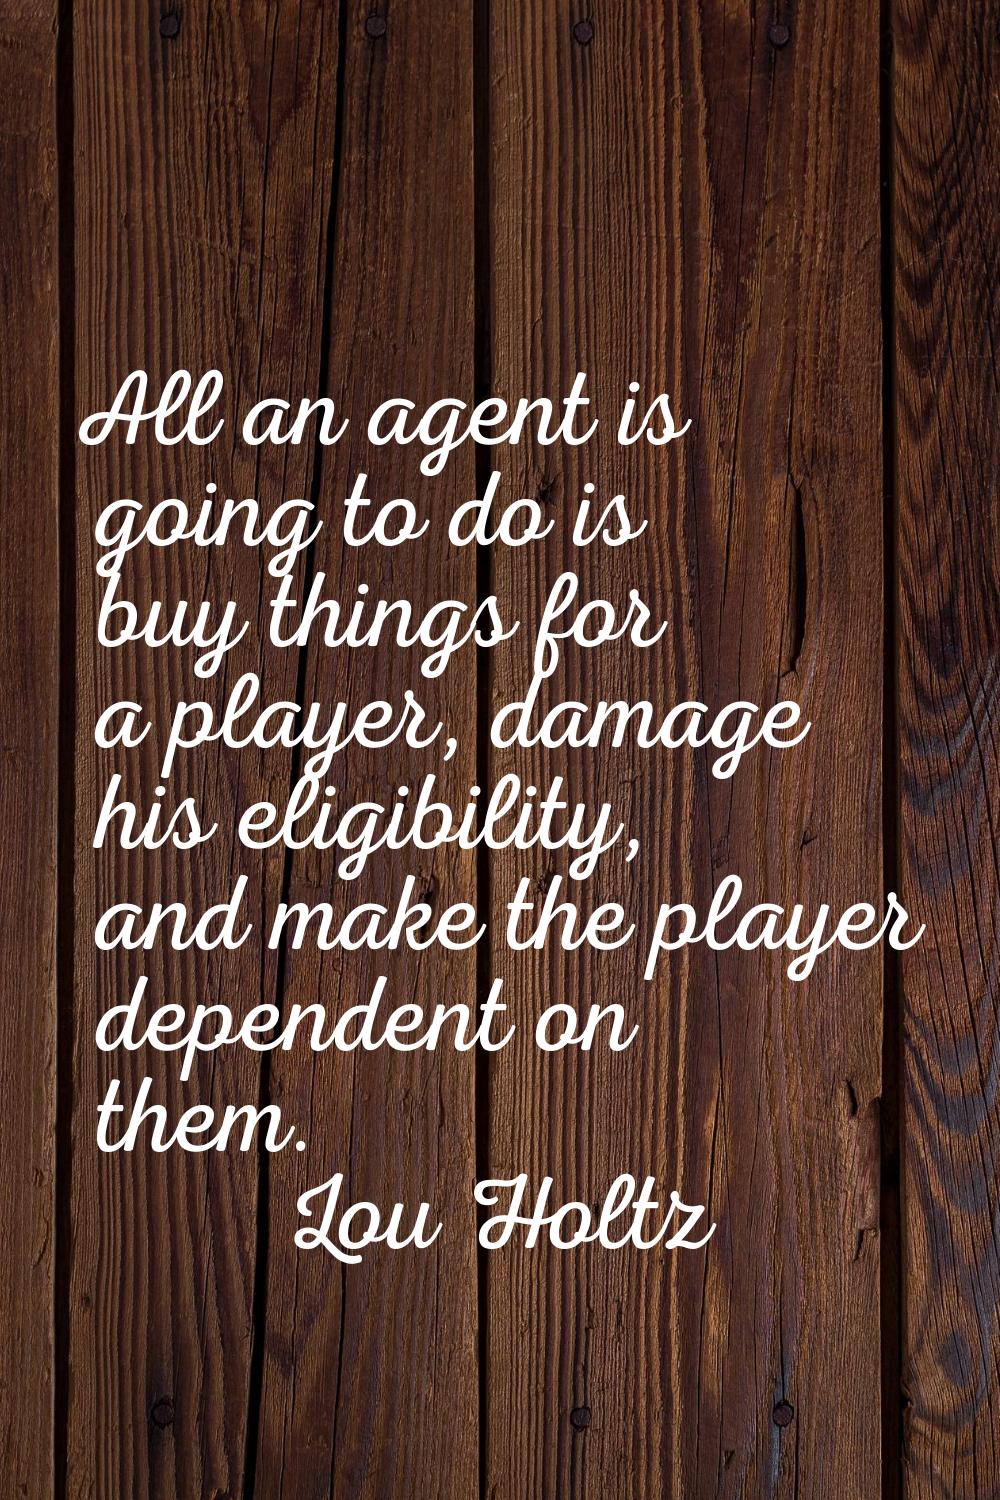 All an agent is going to do is buy things for a player, damage his eligibility, and make the player